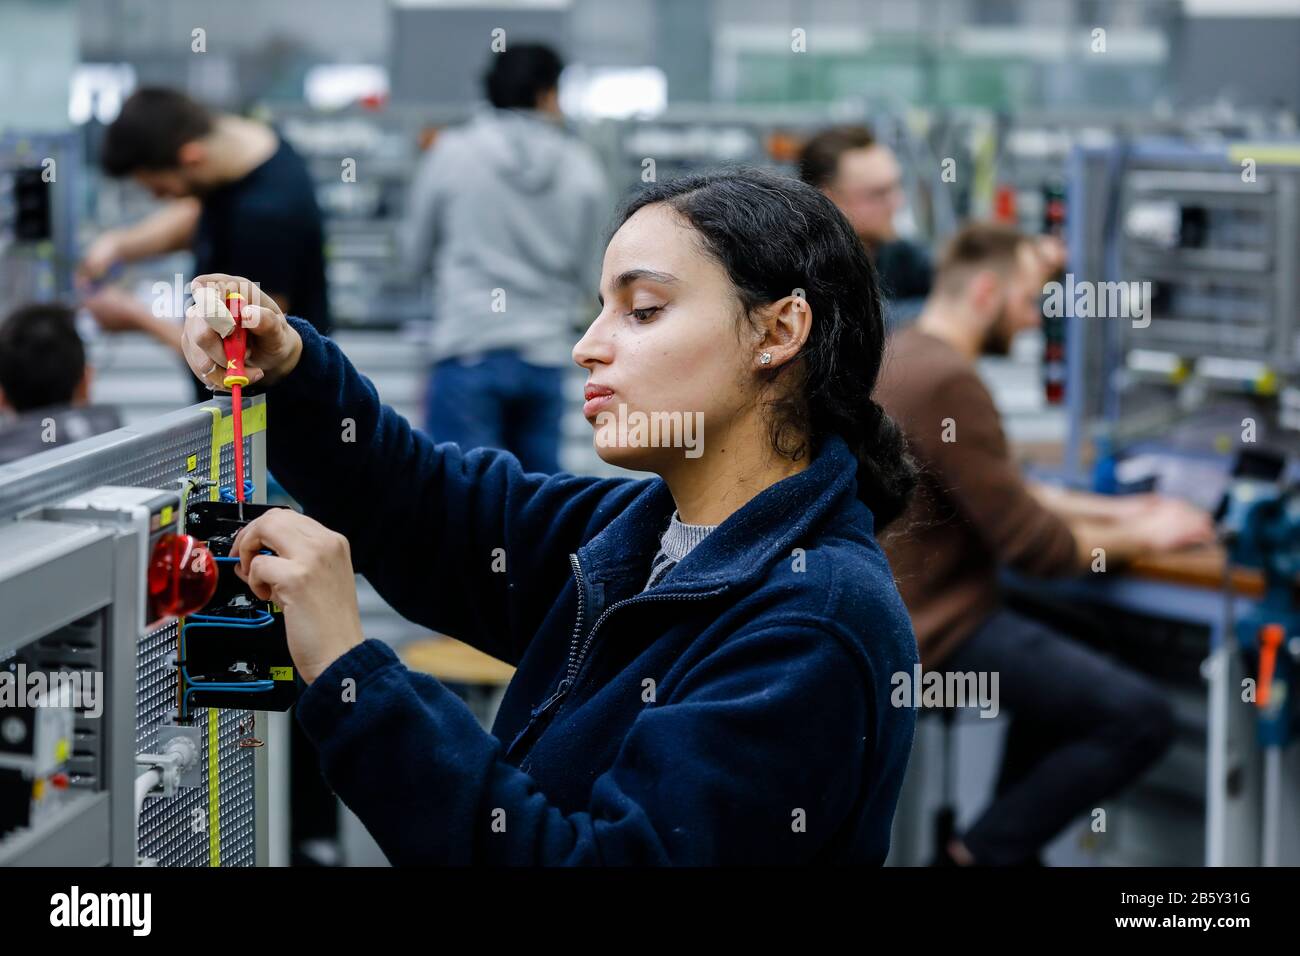 Remscheid, North Rhine-Westphalia, Germany - Trainee woman in electrical professions, an industrial electrician assembles a circuit, vocational traini Stock Photo